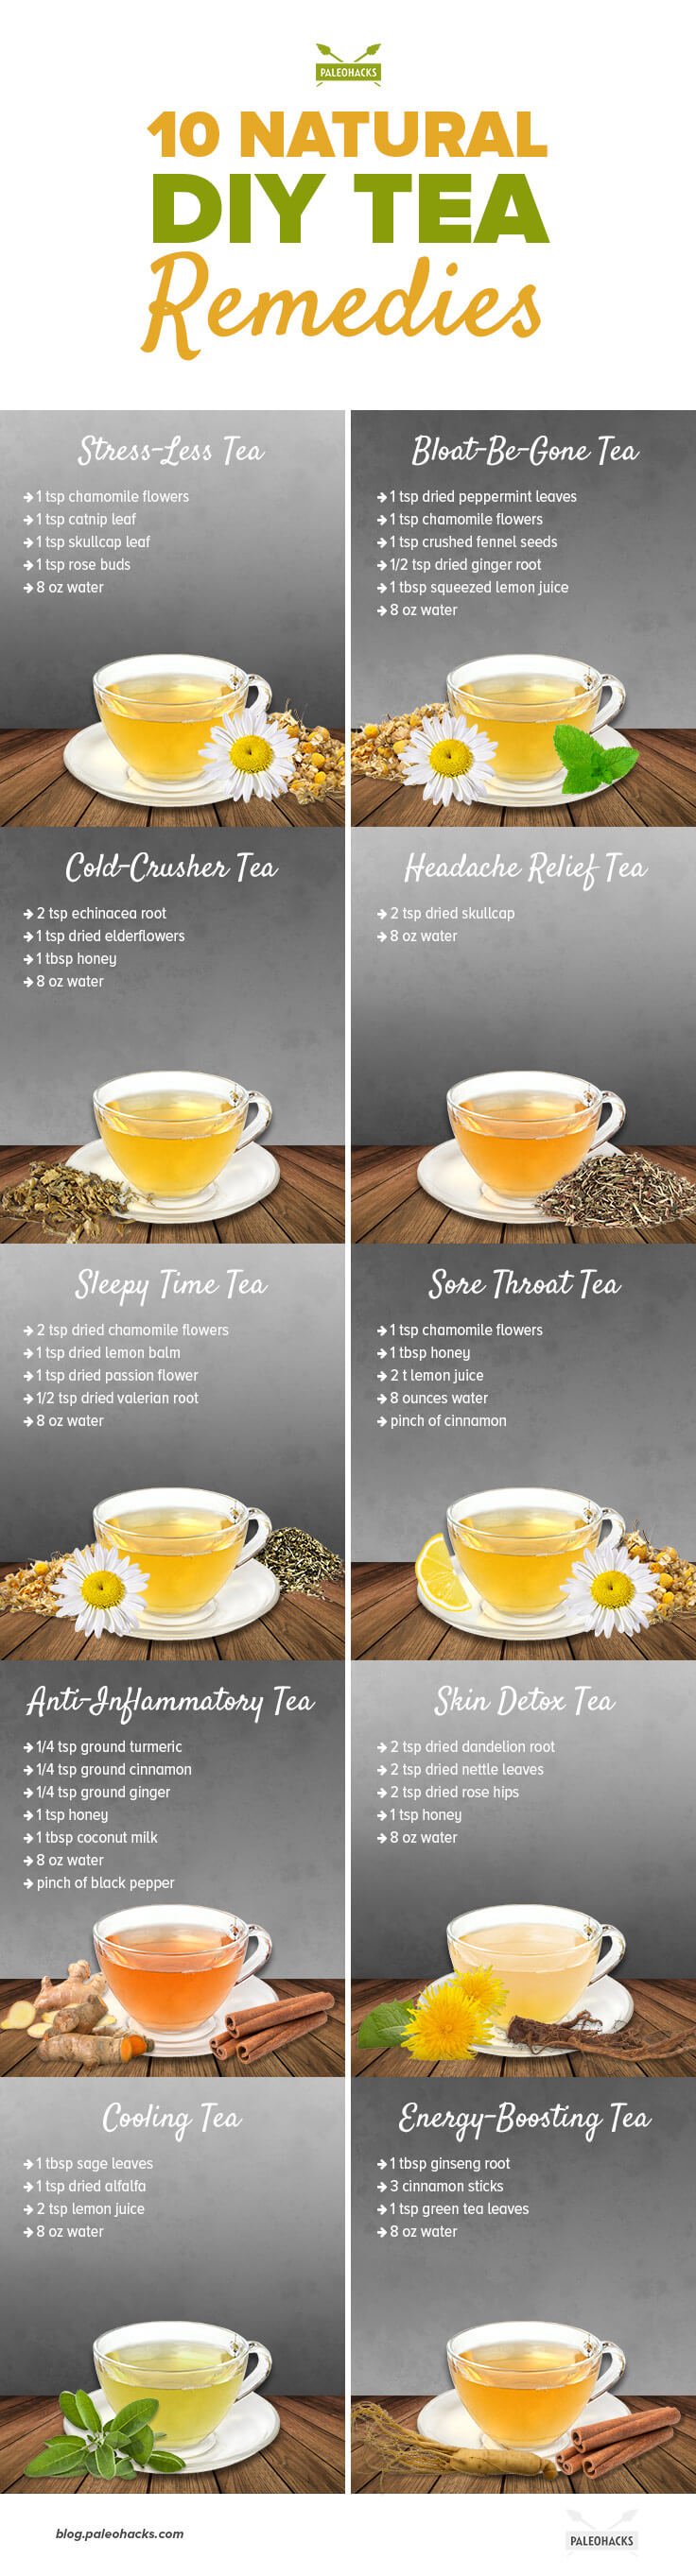 Bank off the ancient beneficial effects of roots, barks, leaves, and flowers in these soothing tea remedies for sleep, a sore throat, inflammation and more.